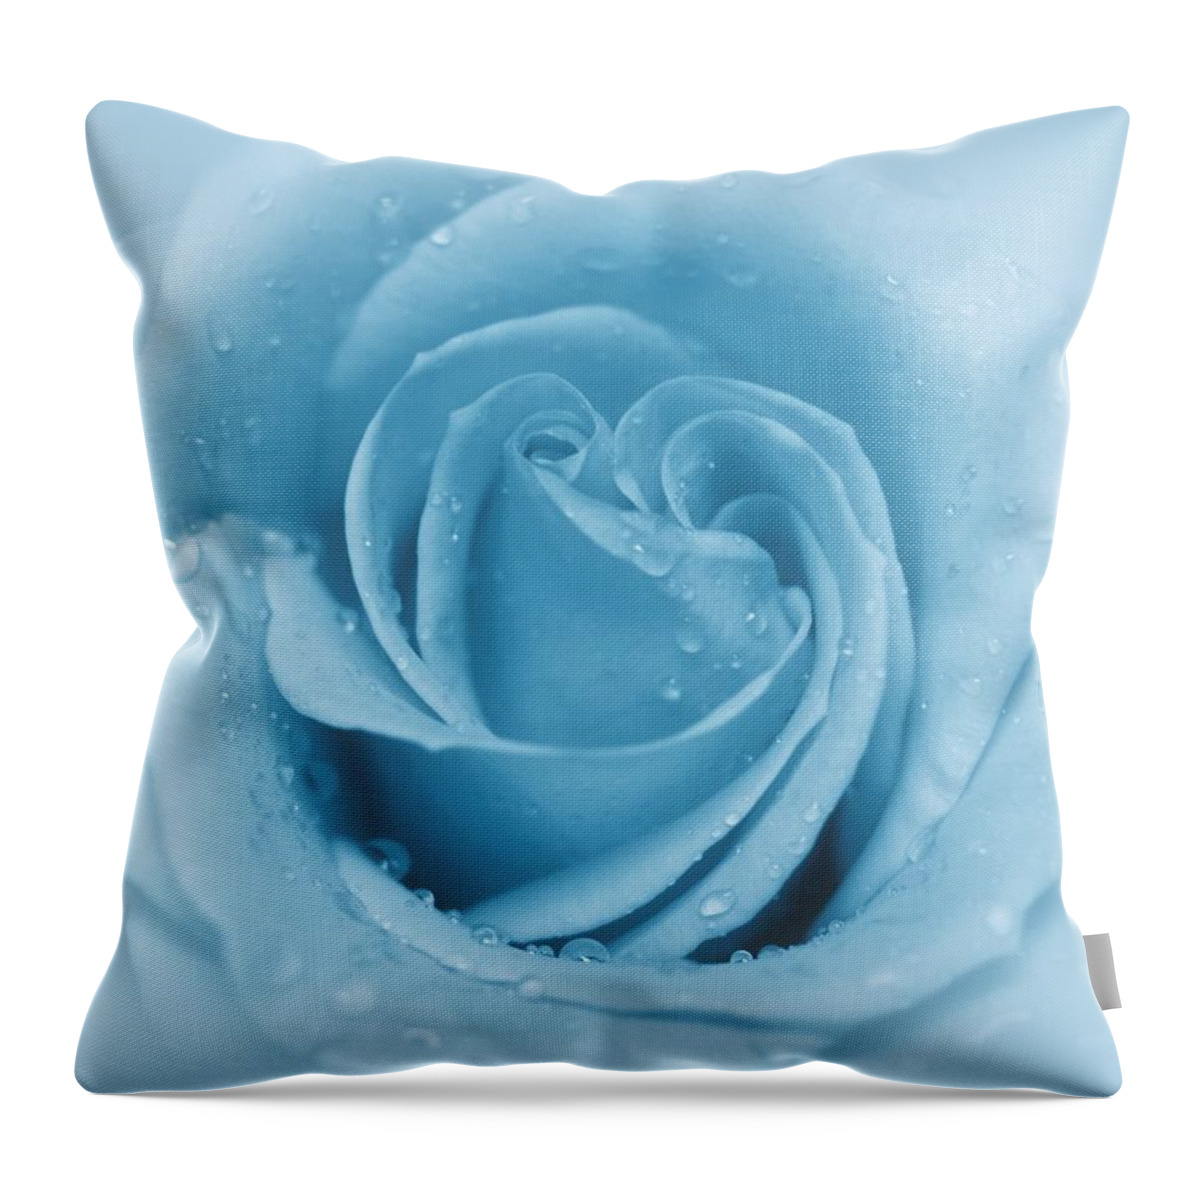 Rose Throw Pillow featuring the photograph Baby Soft - Blue by Angie Tirado